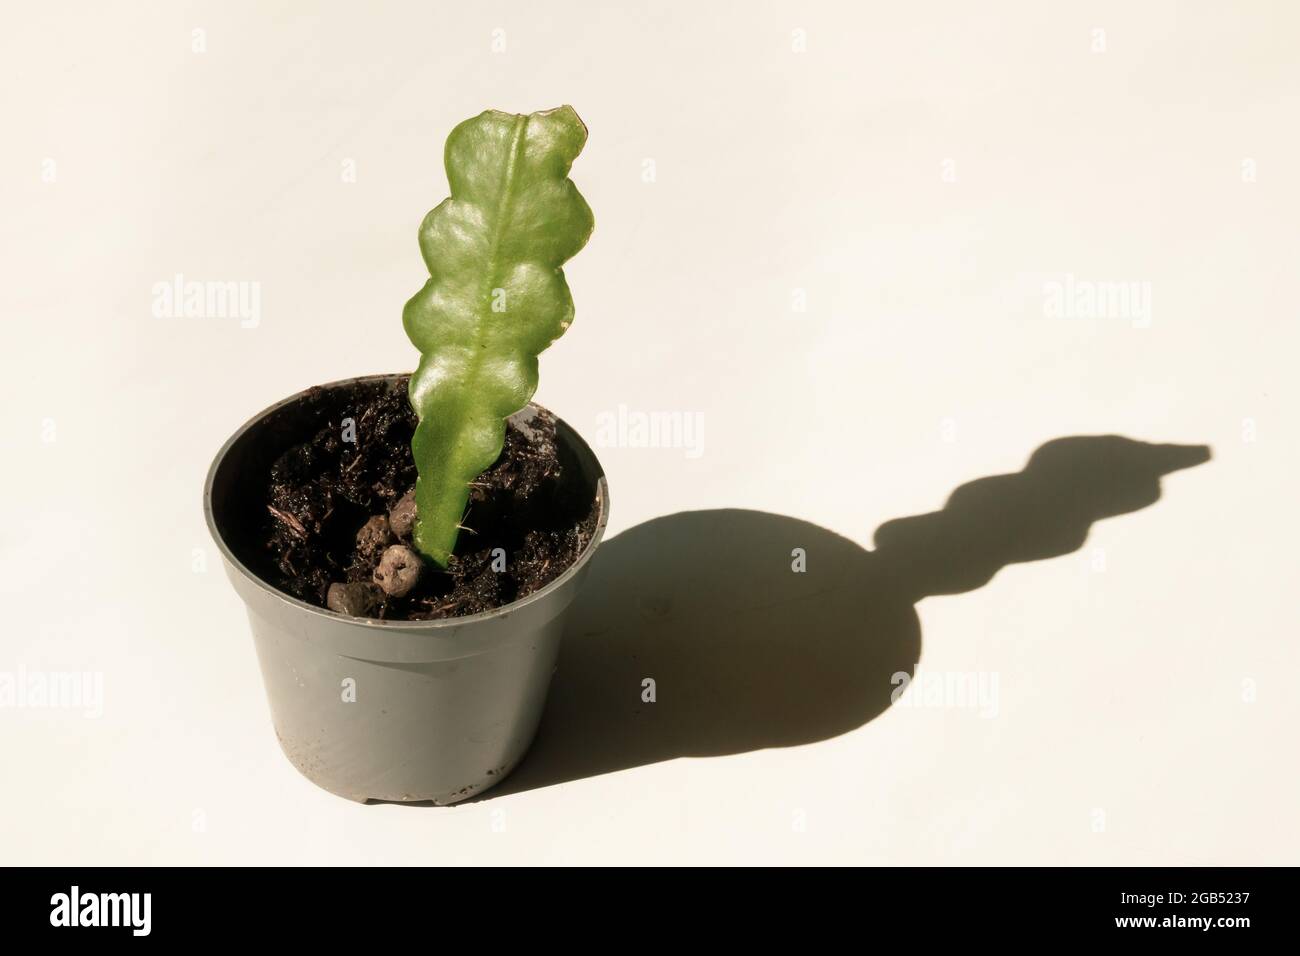 An angled view of a young, recently propagated Fishbone or zig zag Cactus casting a clean, rounded shadow against a plain white background Stock Photo